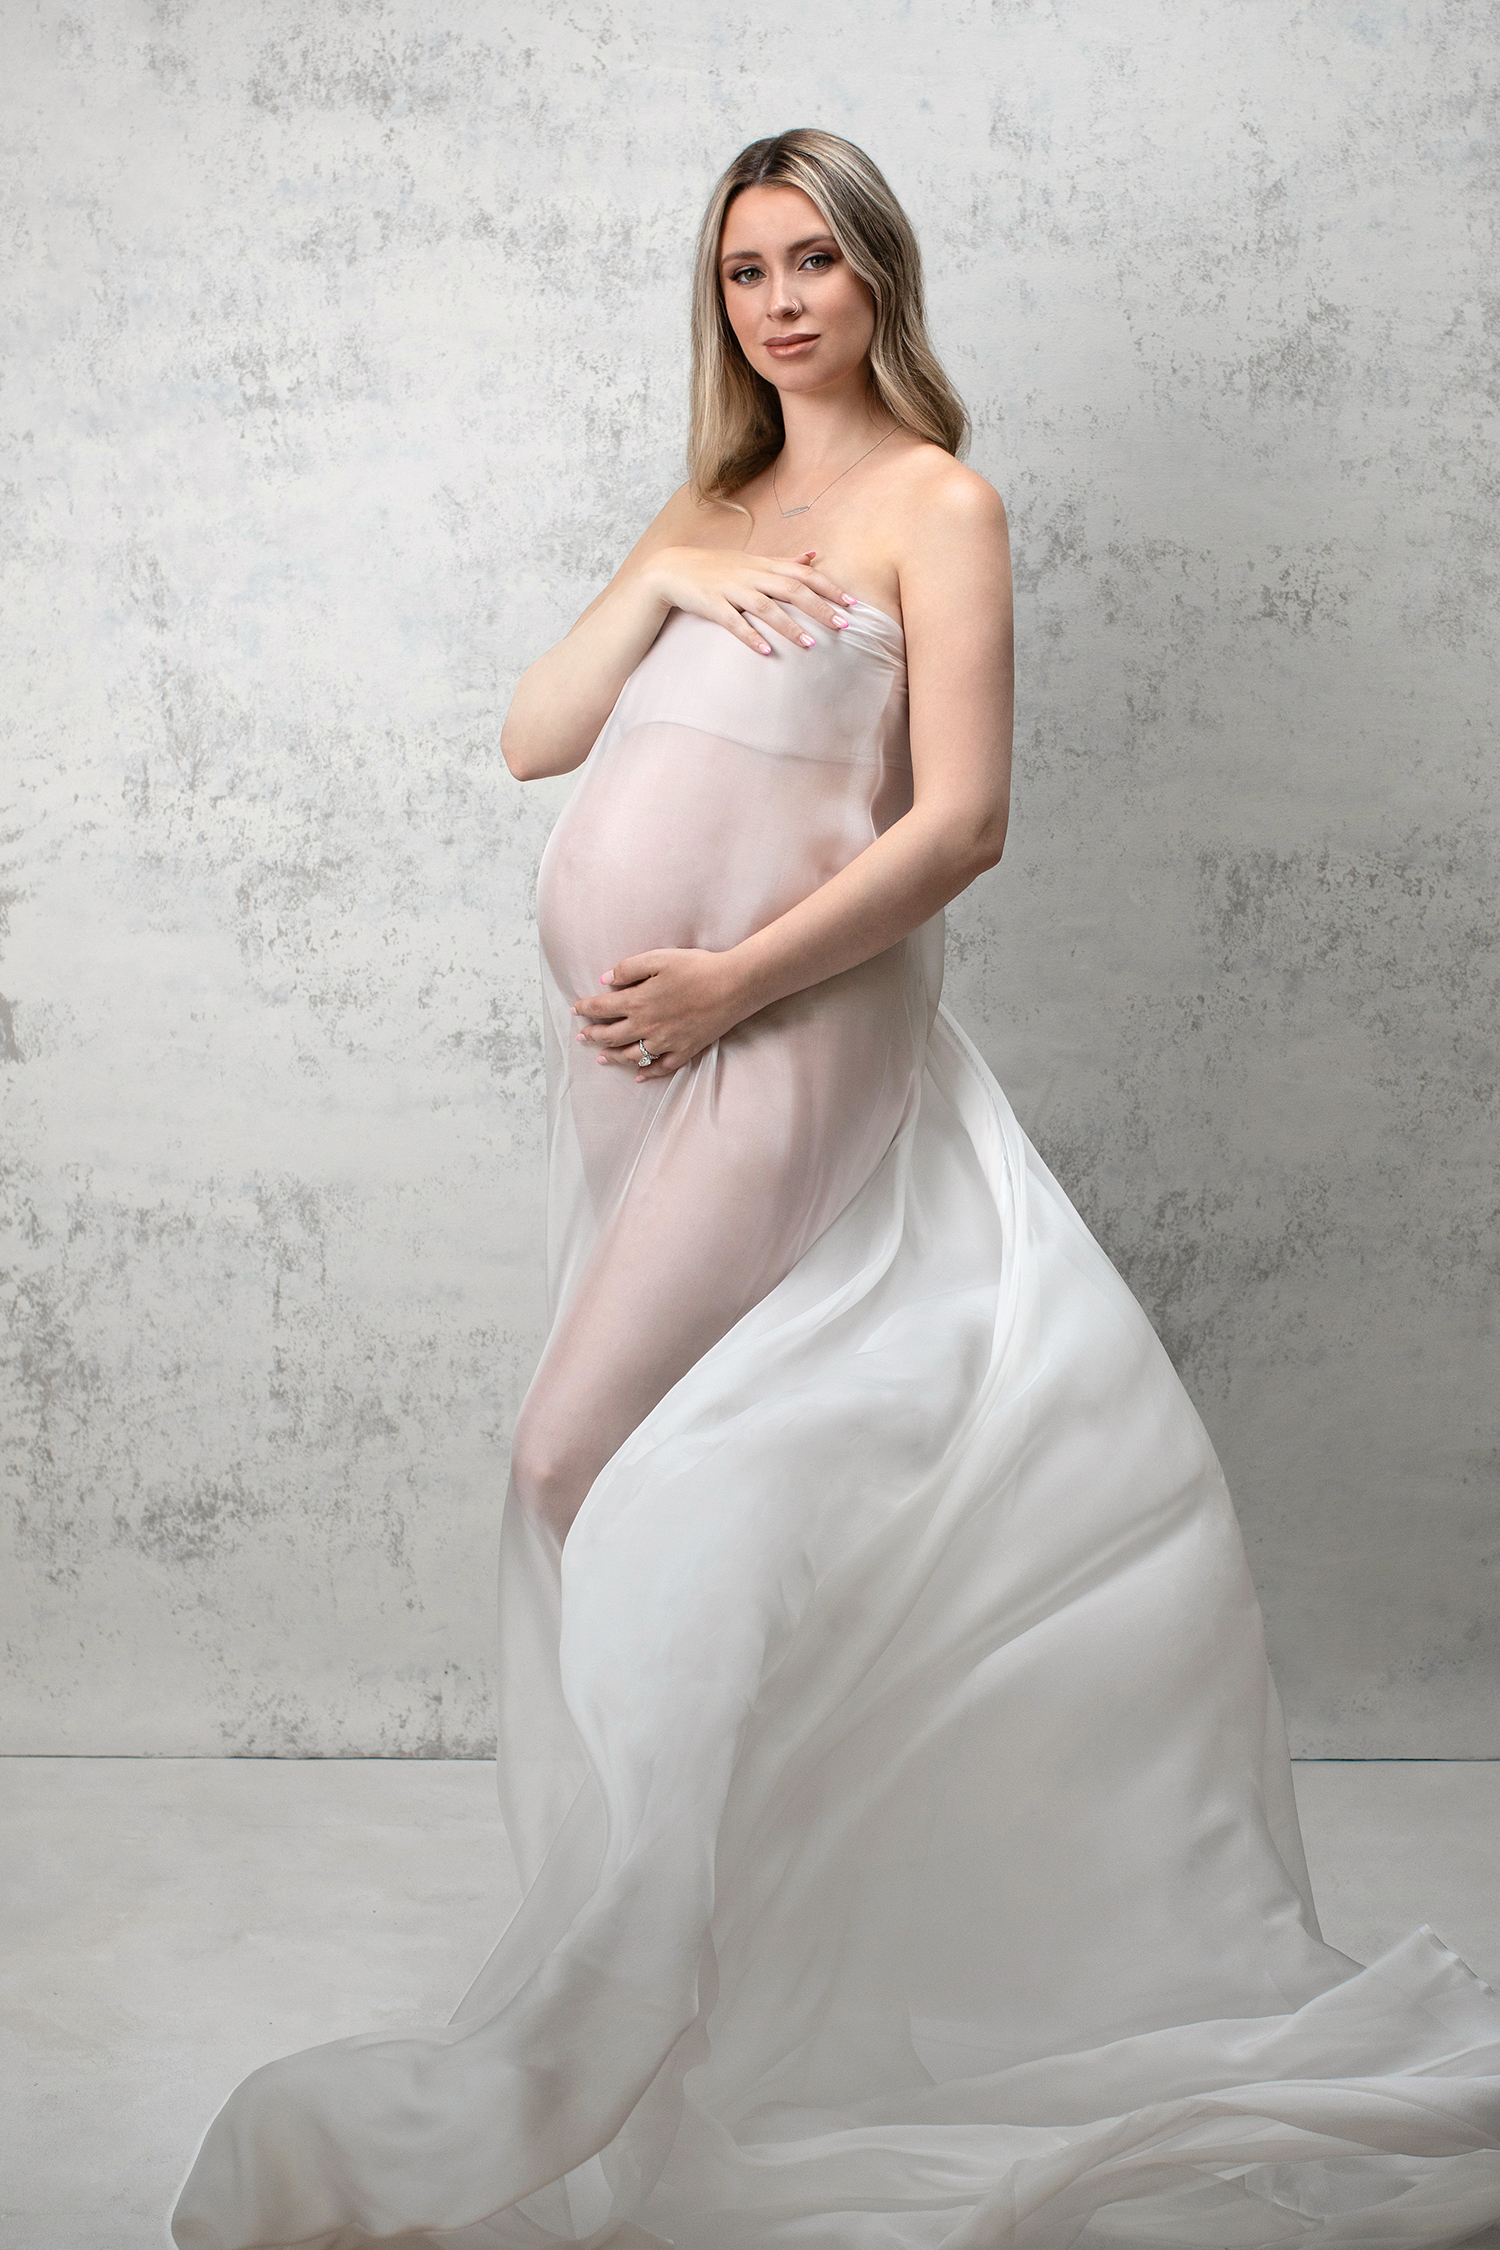 An alluring photograph of a glamorous mom-to-be, embraced by the soft fabrics of an exquisite gown, radiating luxury and grace in her maternity photoshoot.